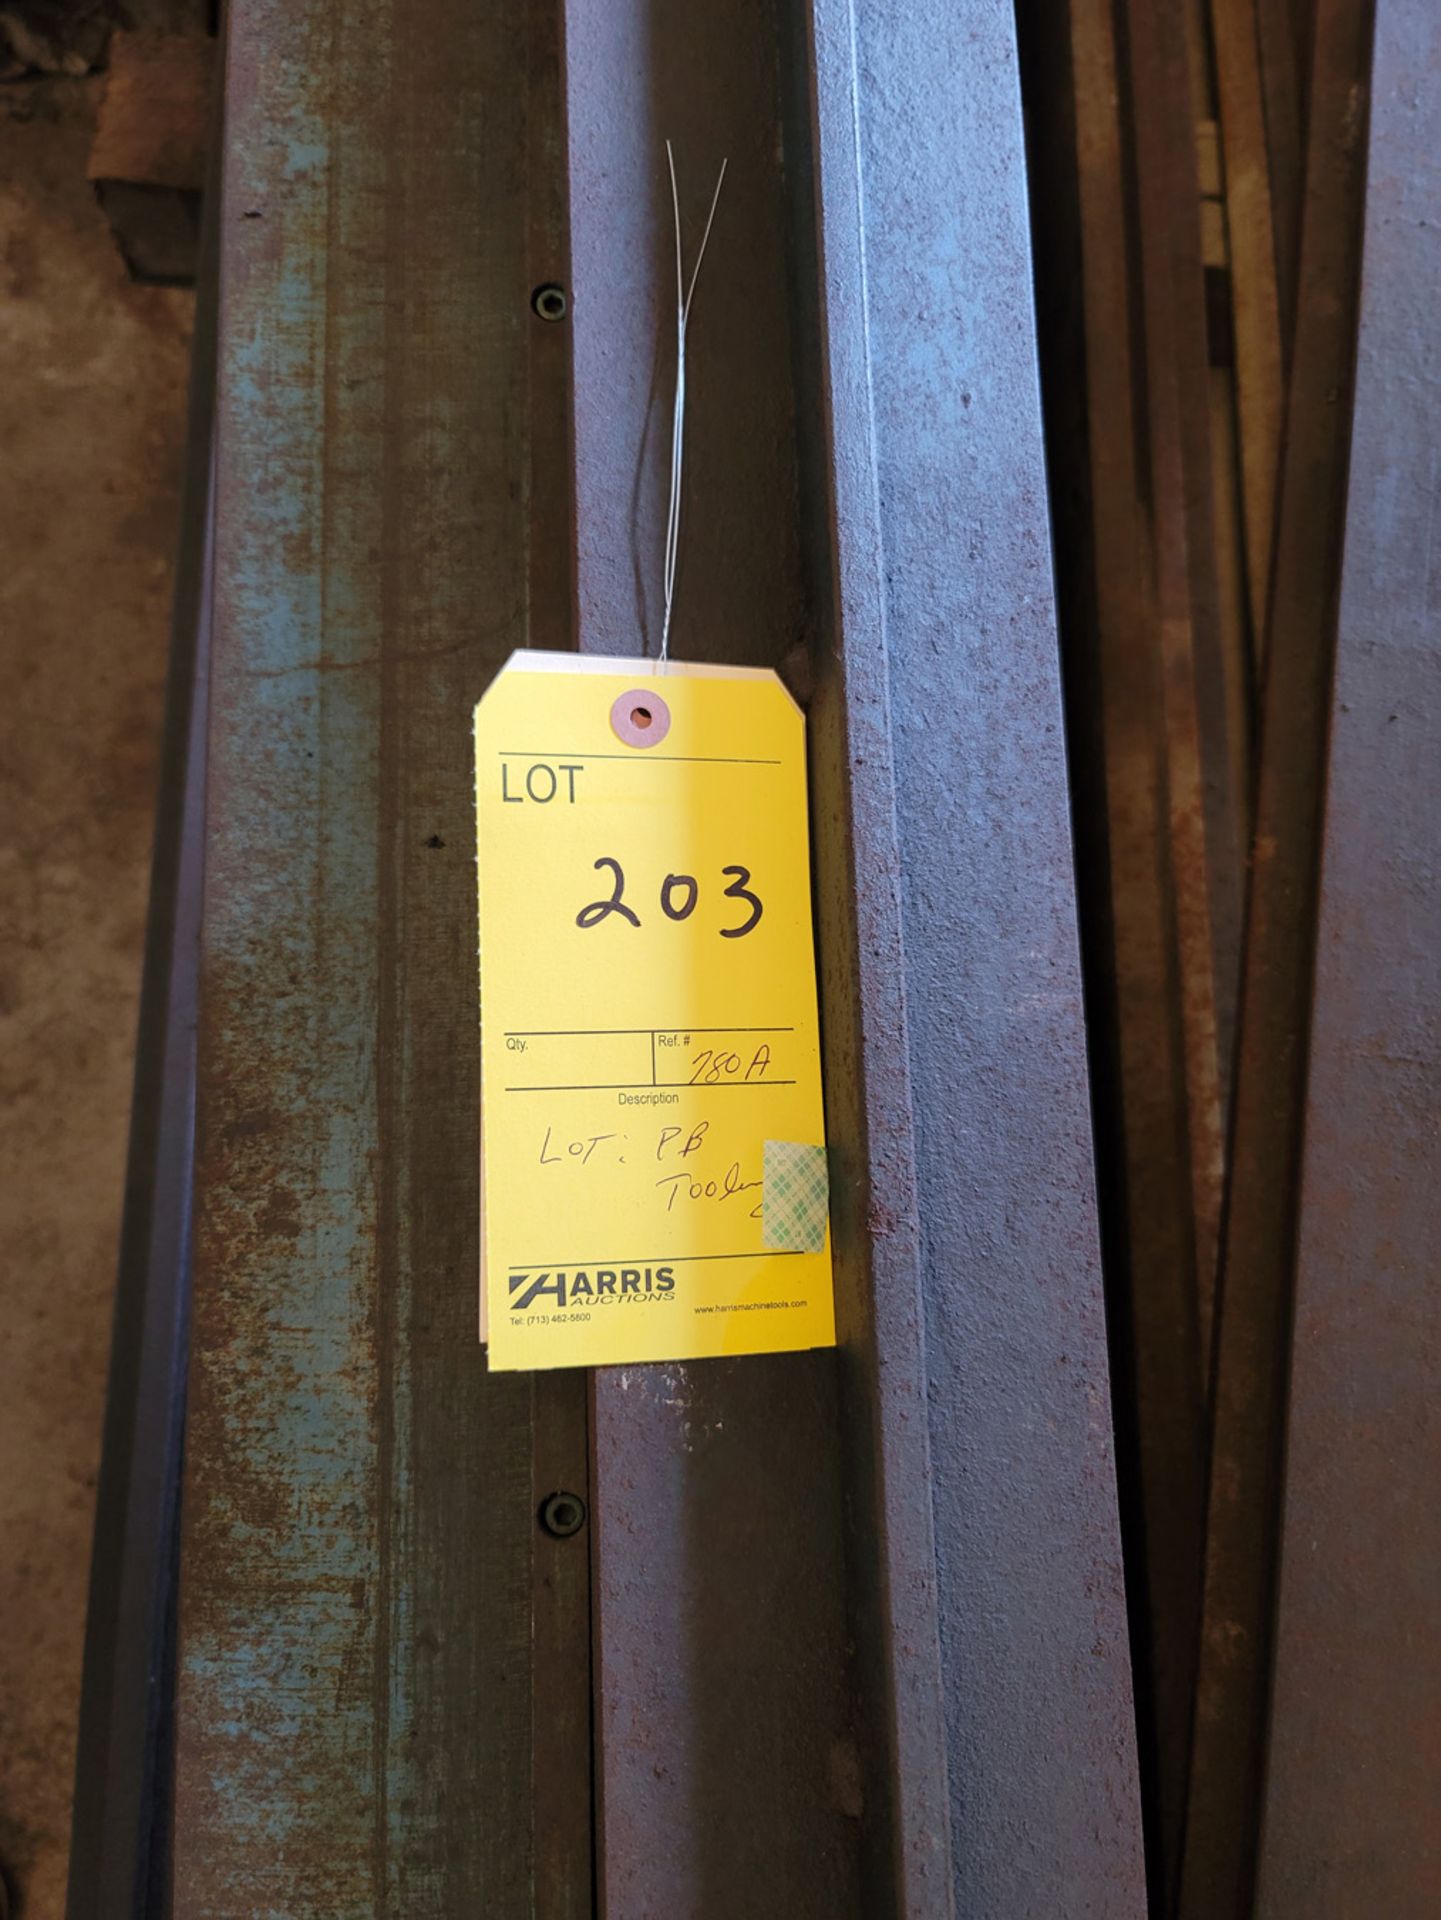 Lot: Press Brake Tooling, assorted lengths and sizes - Image 4 of 4